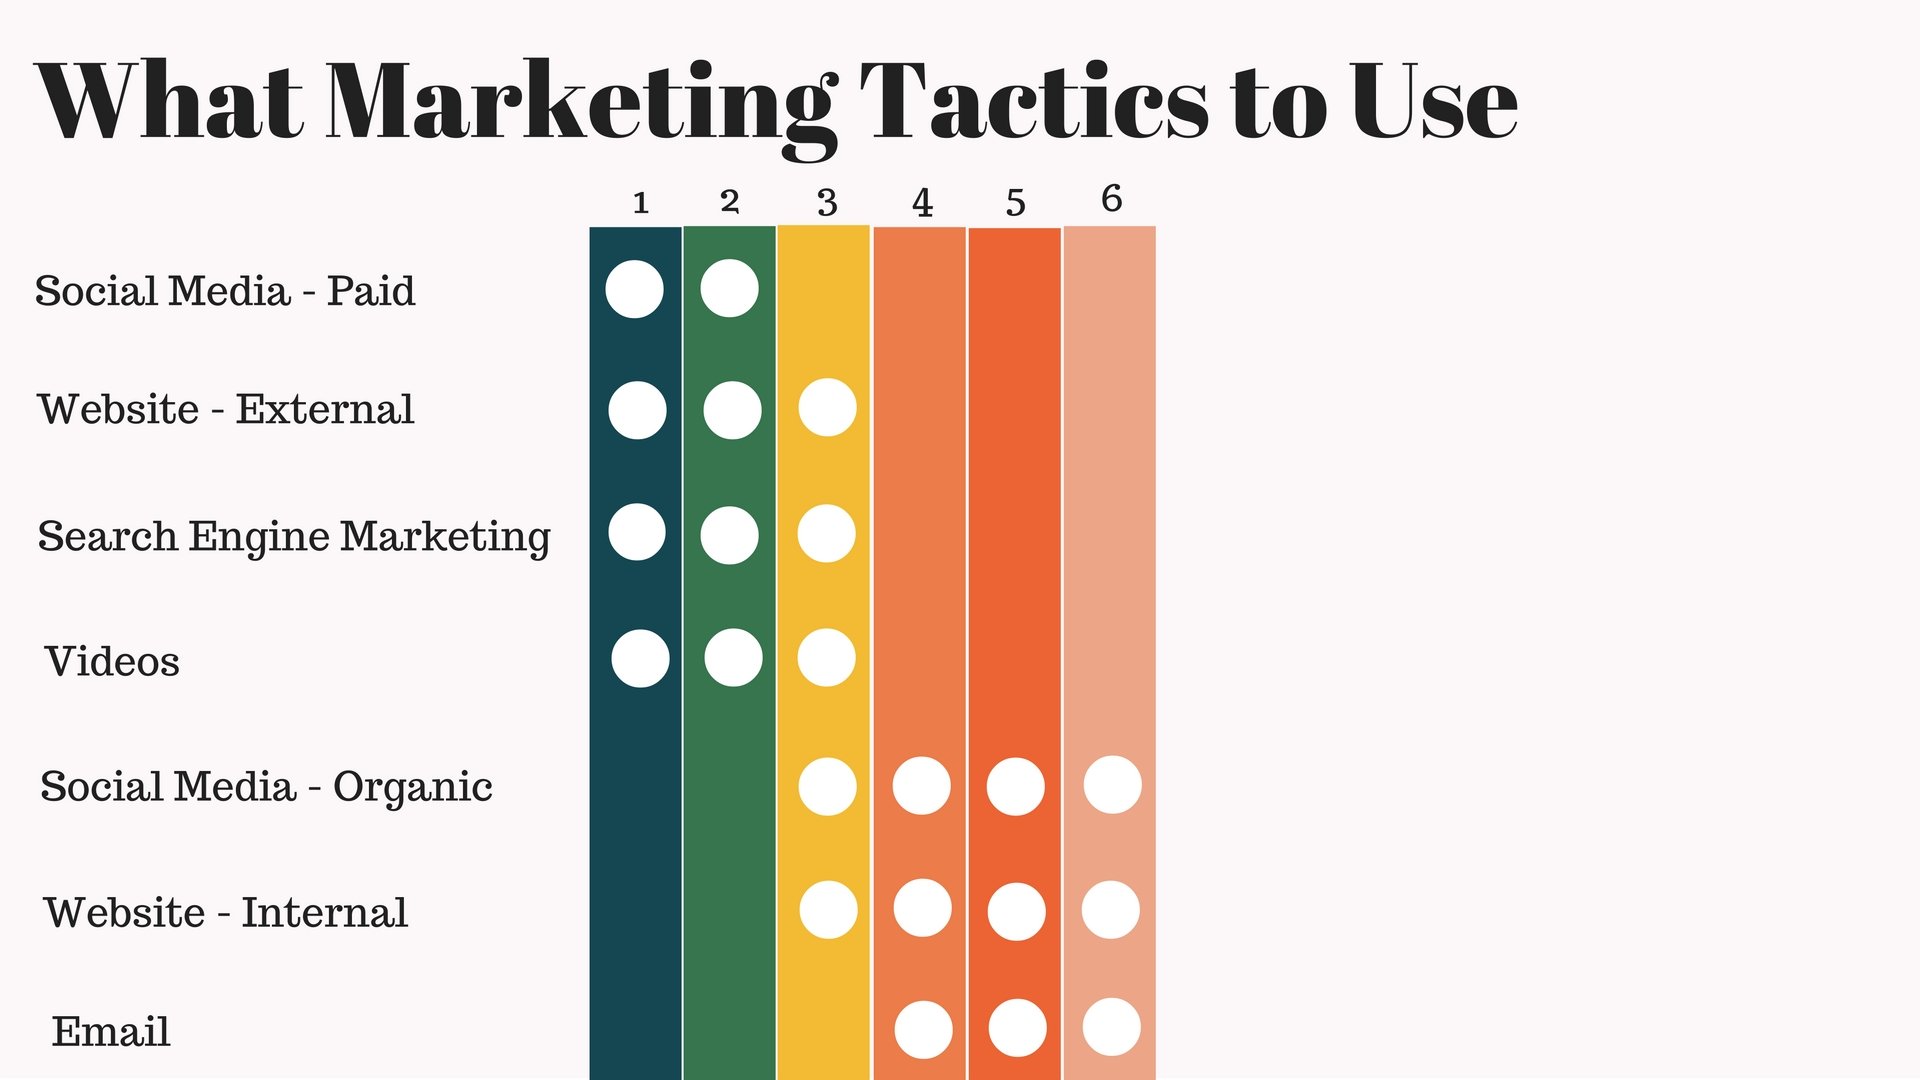 Marketing tactics by sales funnel step: Have a problem, looking for solutions, and know of your solution: paid social media, external website, SEM, videos. Familiar with your solution, very familiar with your solution, promote your solution: organic social media, internal website, email.